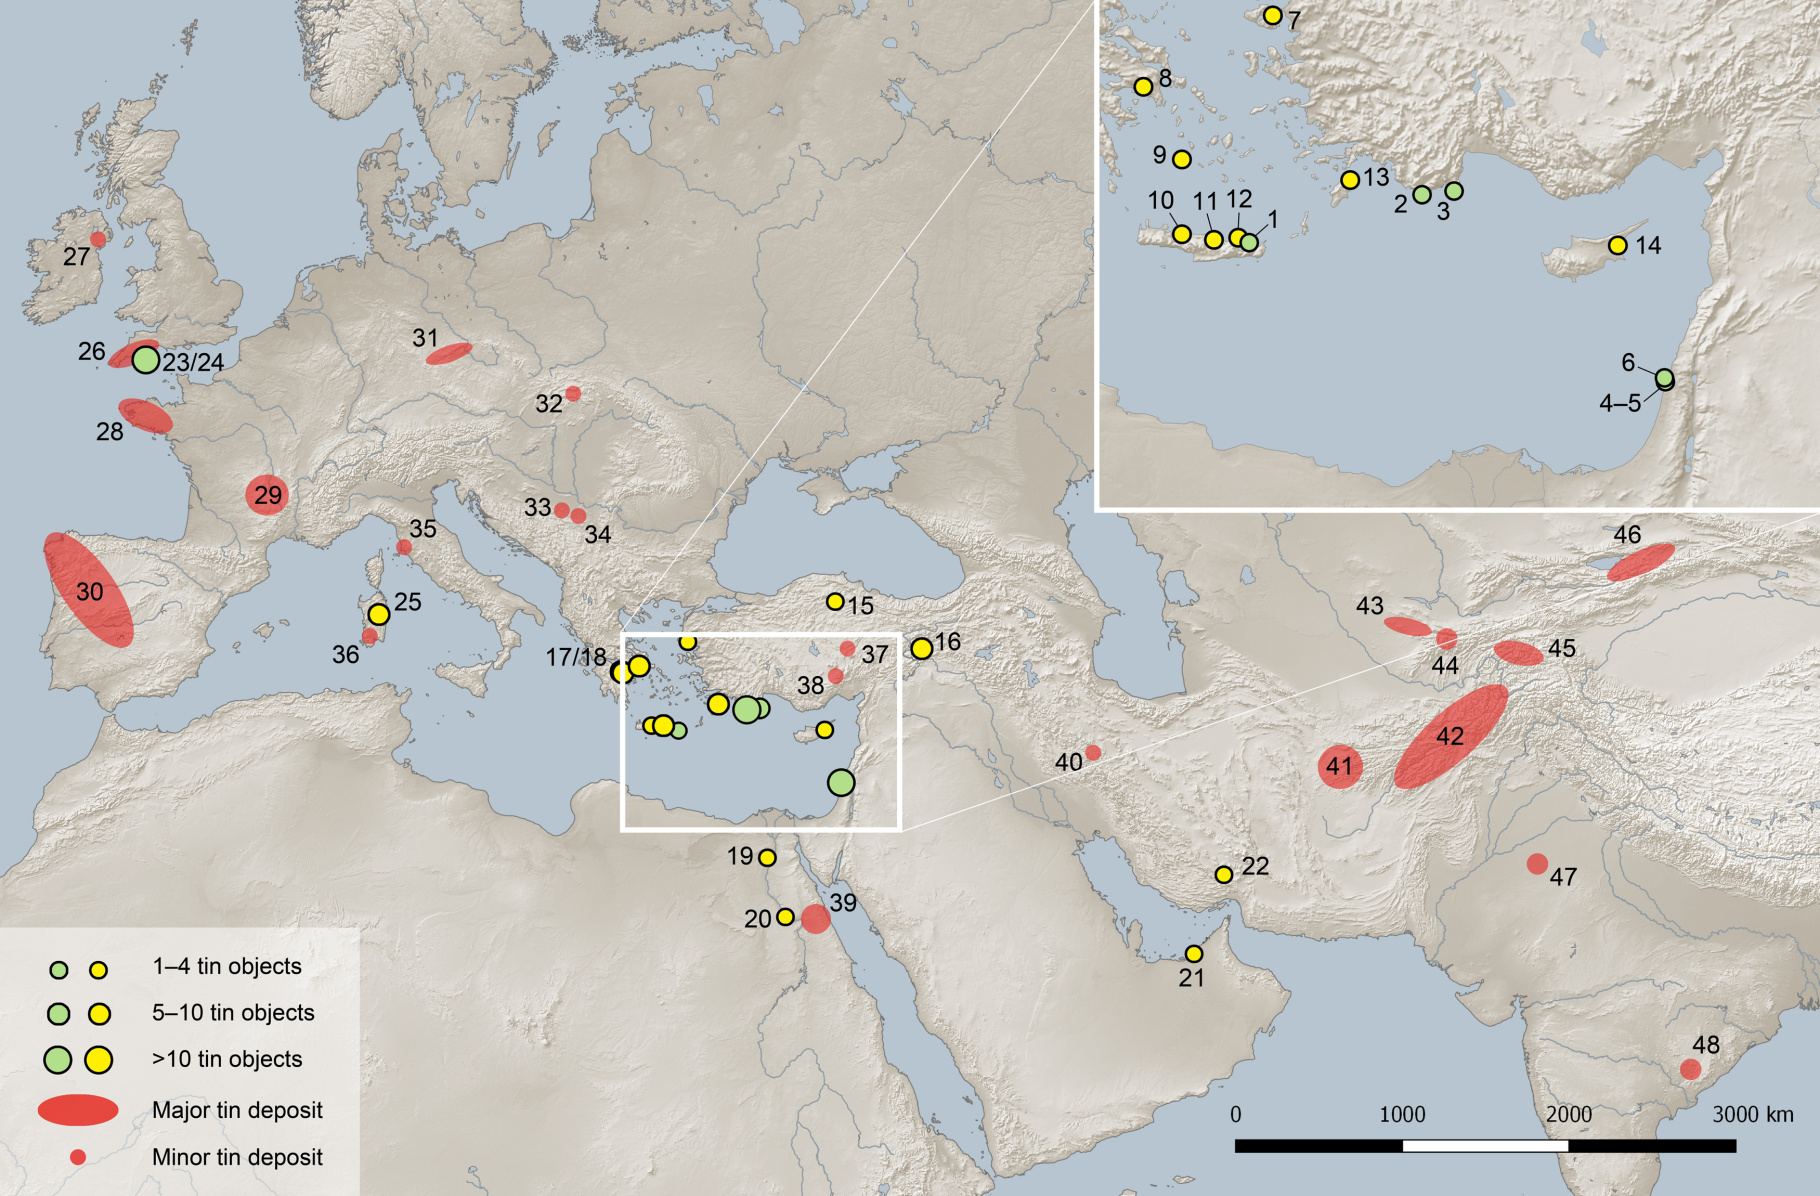 Tin deposits on the Eurasian continent and distribution of tin finds in the area studied dating from 2500-1000 BCE. The arrow does not indicate the actual trade route but merely illustrates the assumed origin of the Israeli tin based on the data.